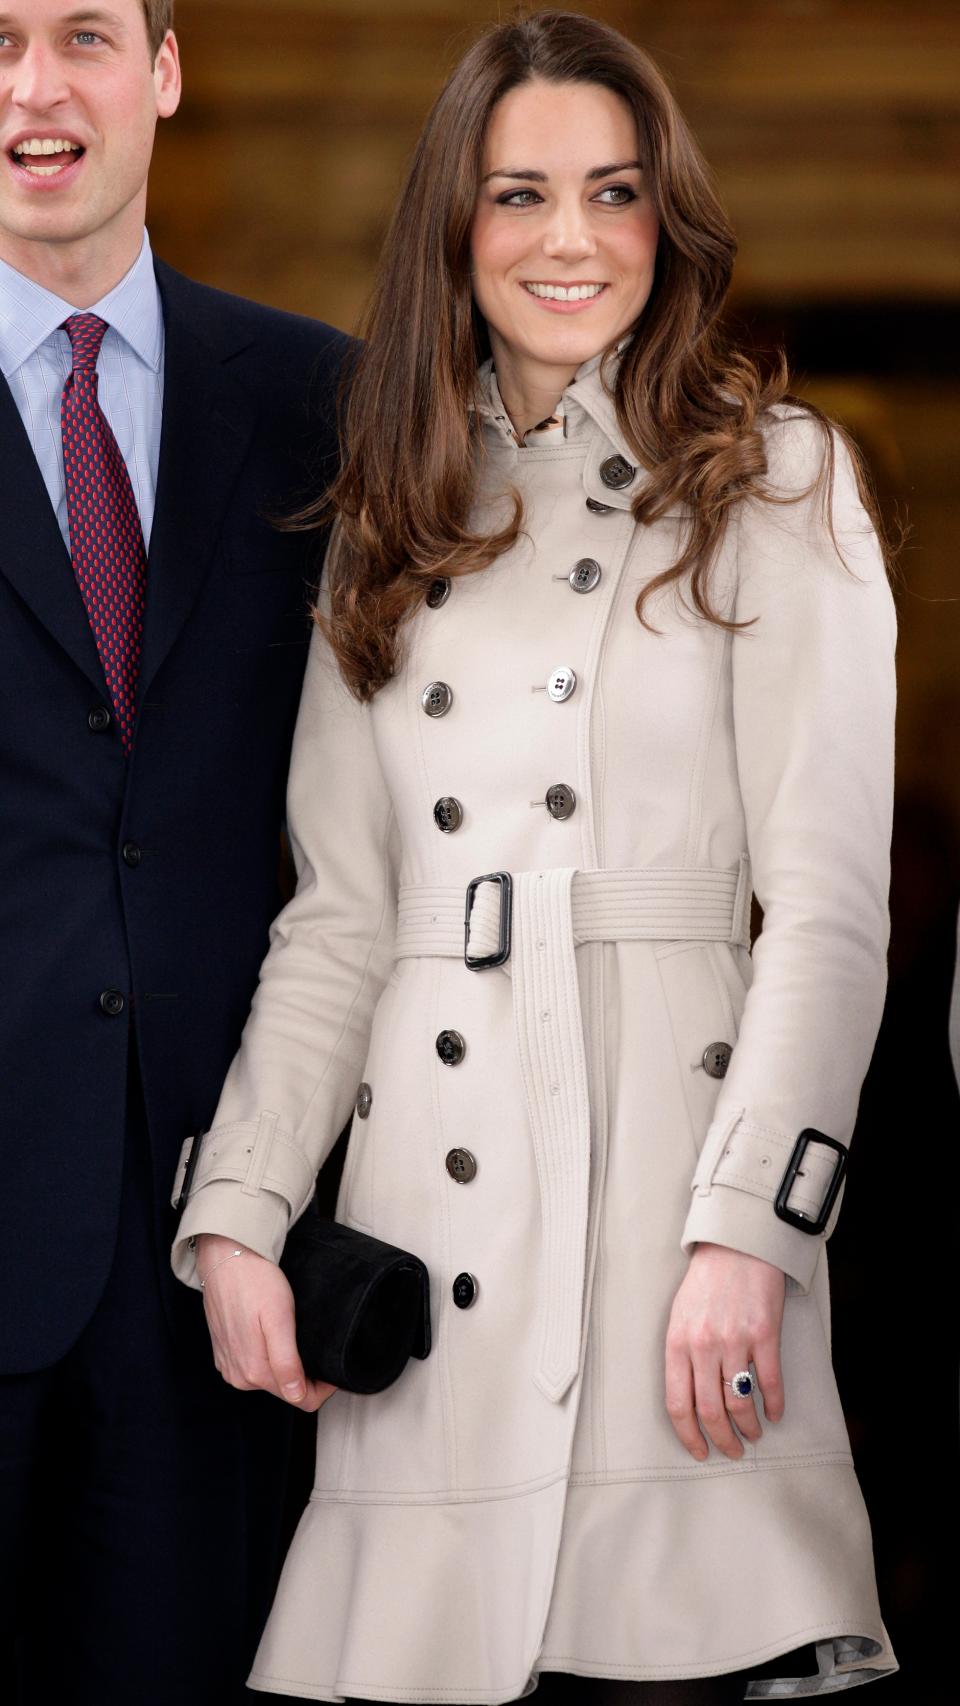 Kate Middleton stands on the steps of City Hall during a visit to Belfast on March 8, 2011